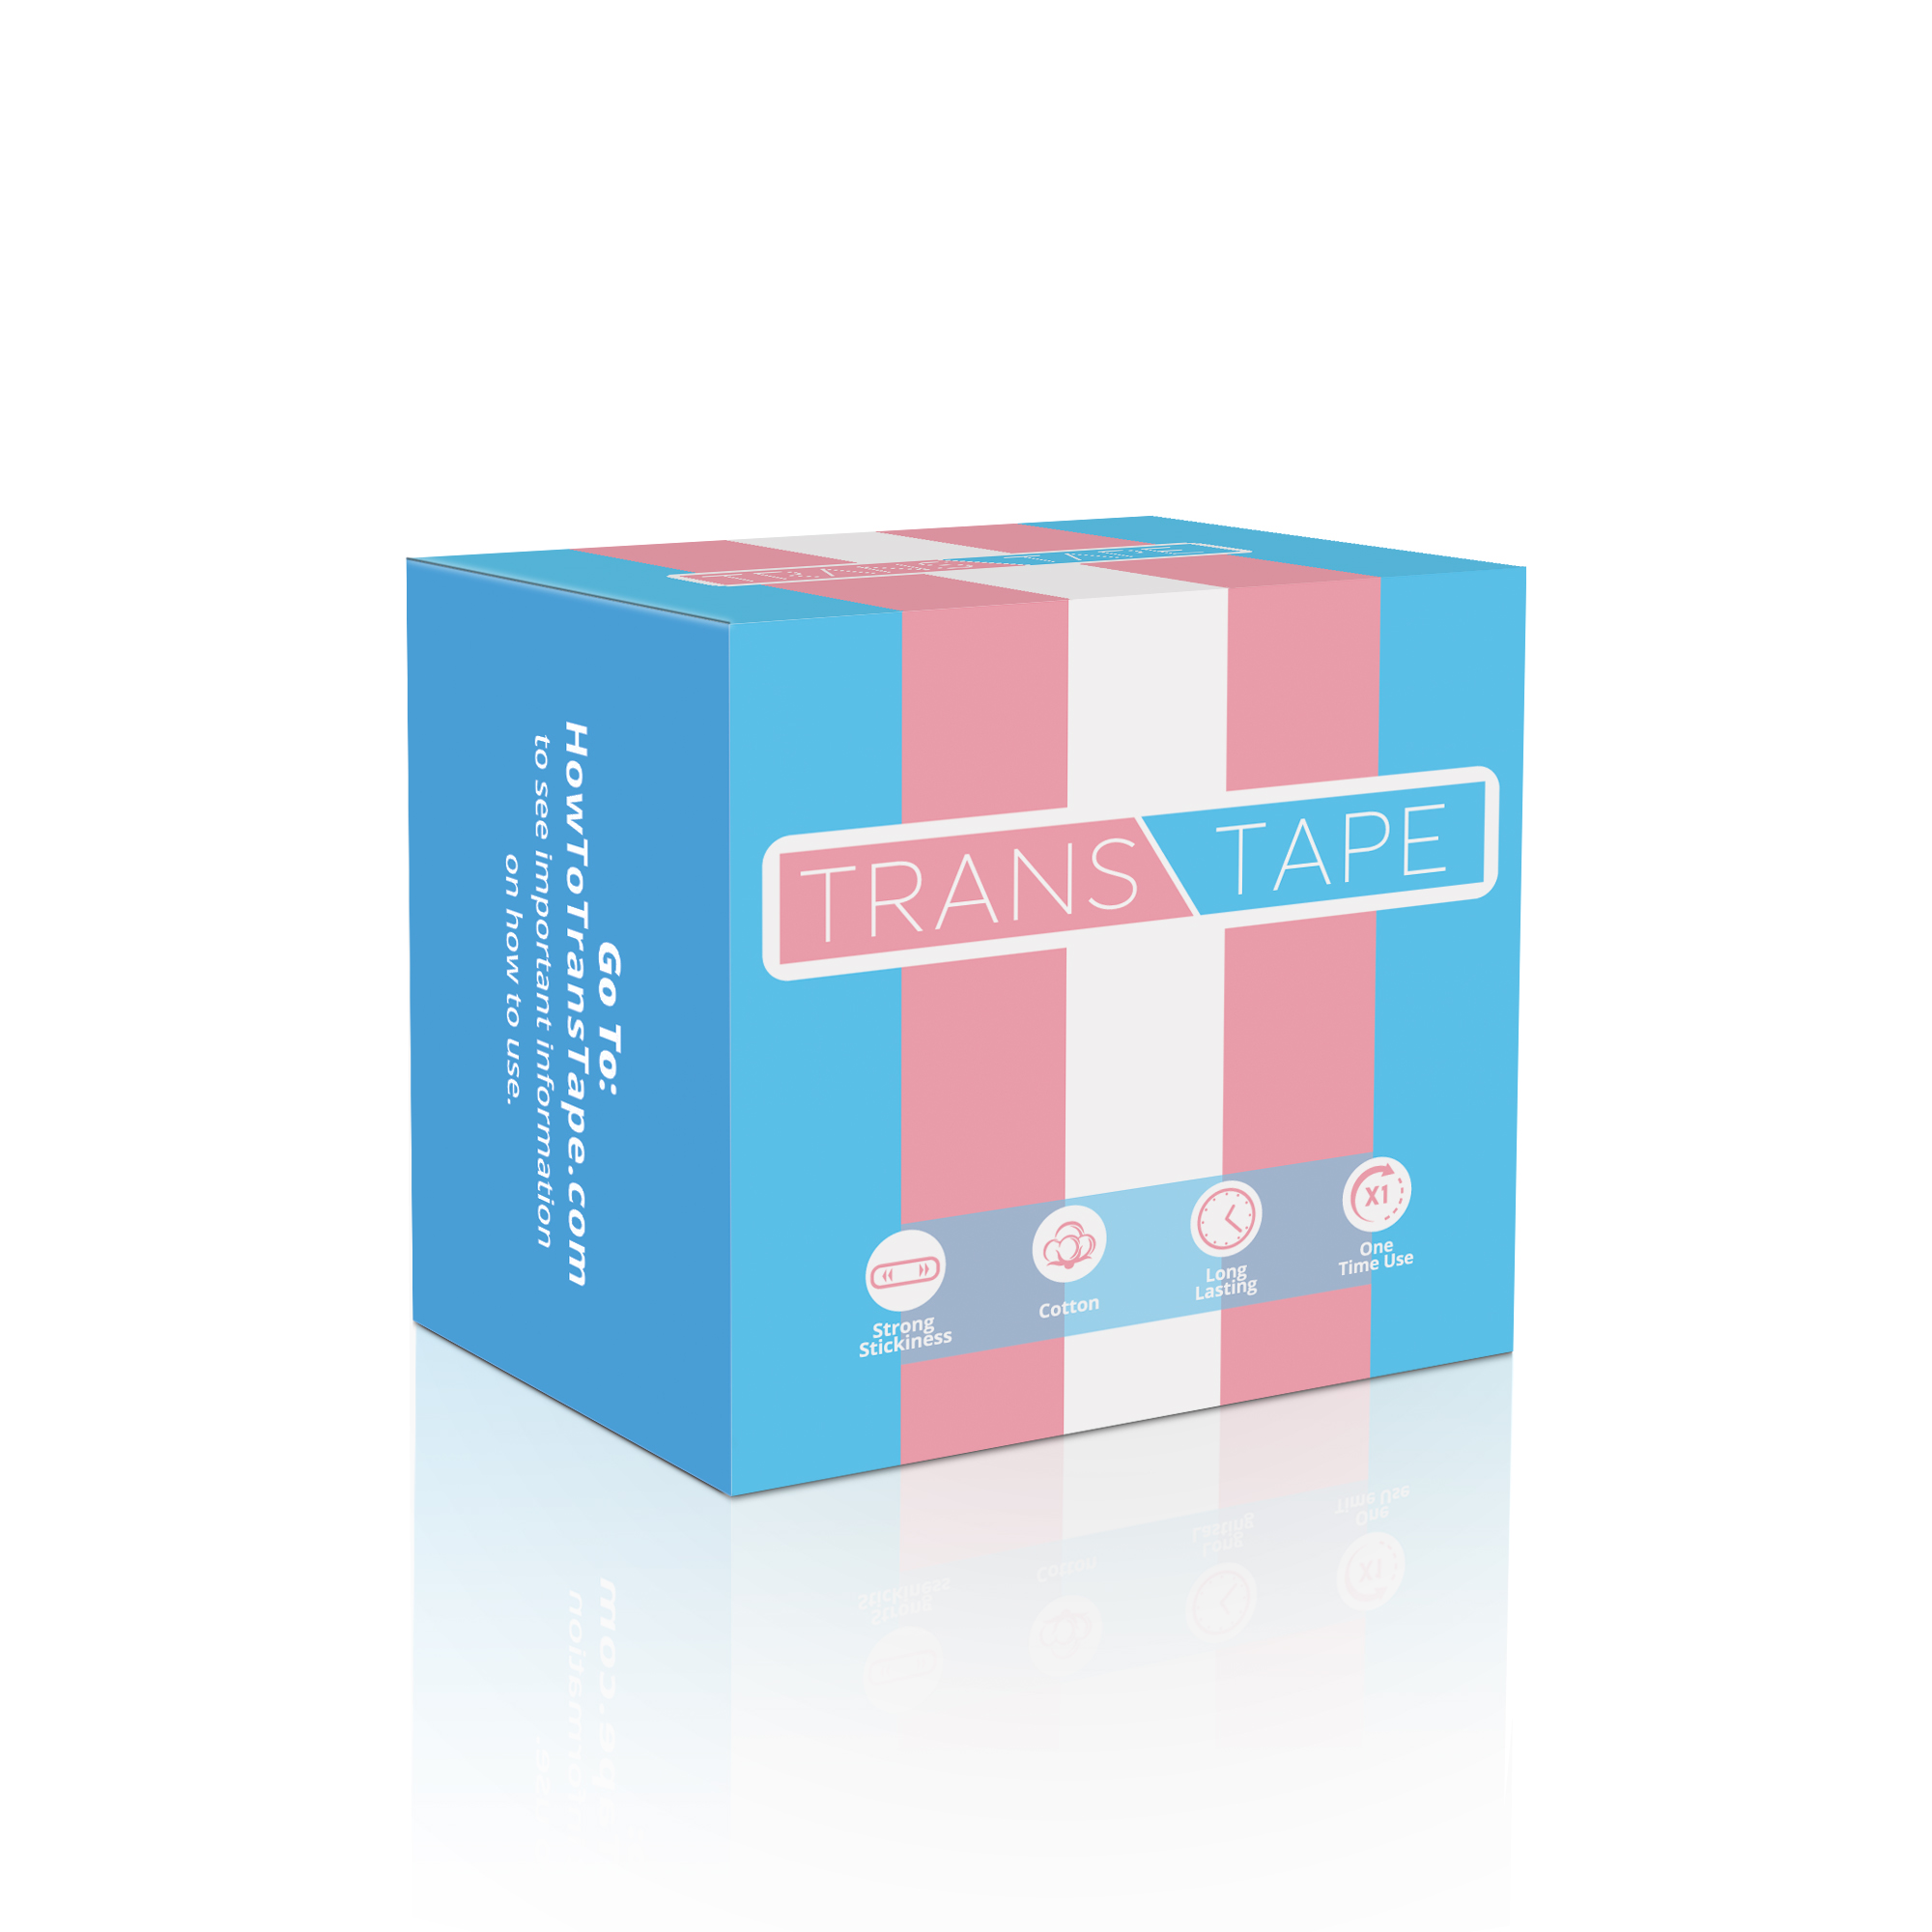 Transtape By Universal Body Labs Is Now Available In Germany